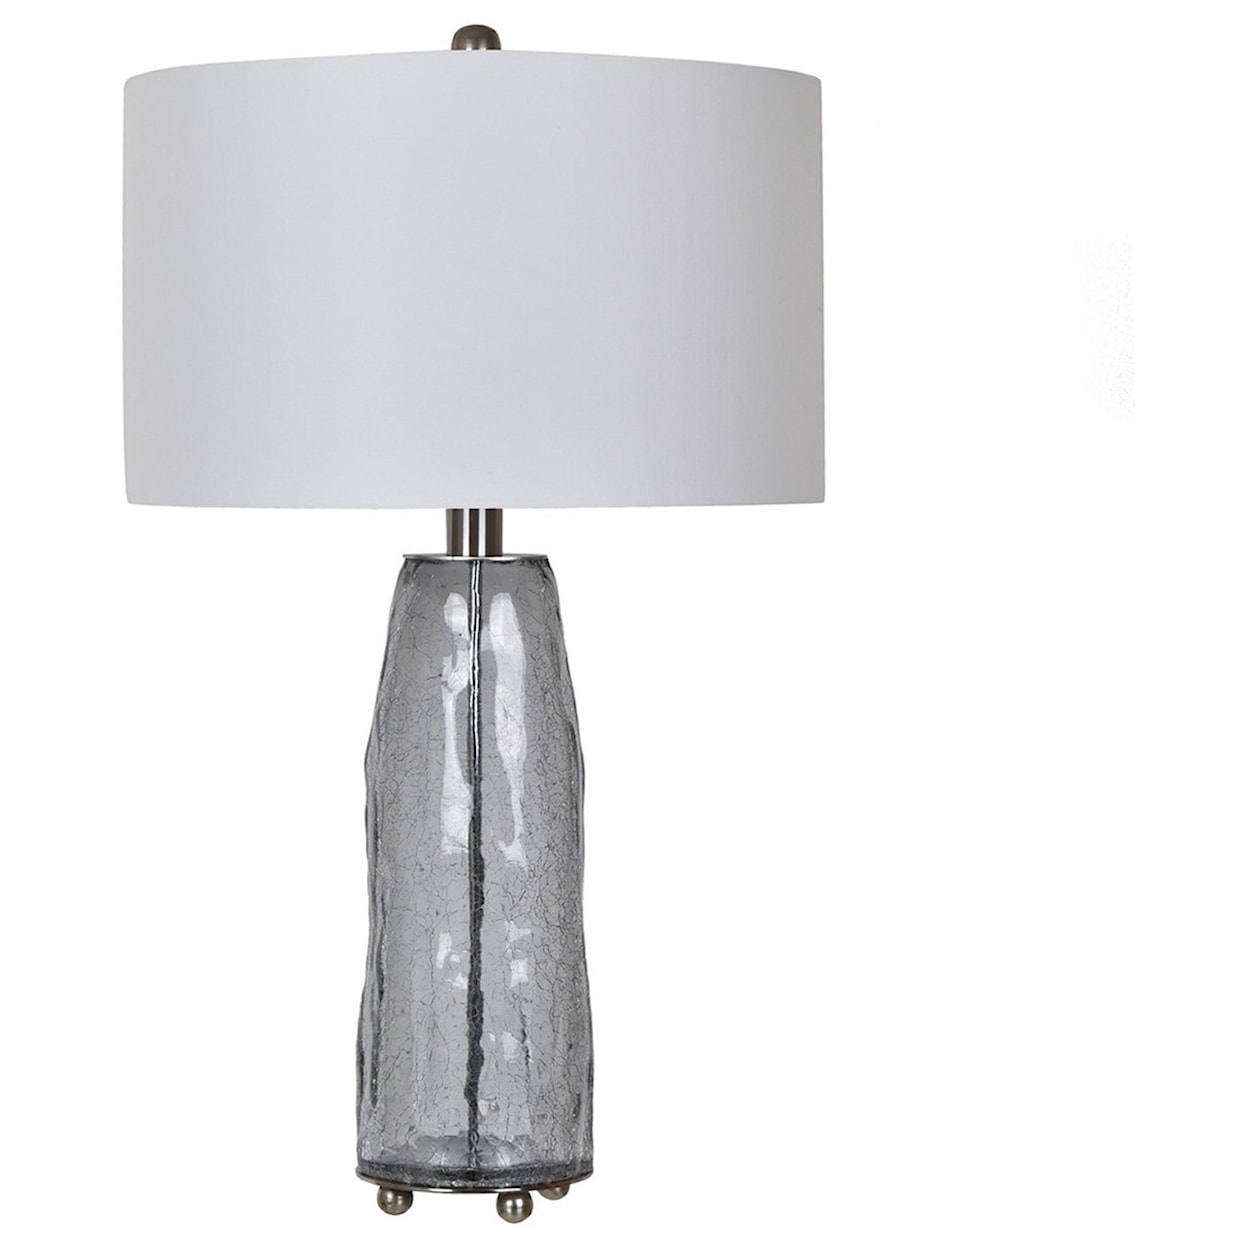 Crestview Collection Lighting Lucca Table Lamp